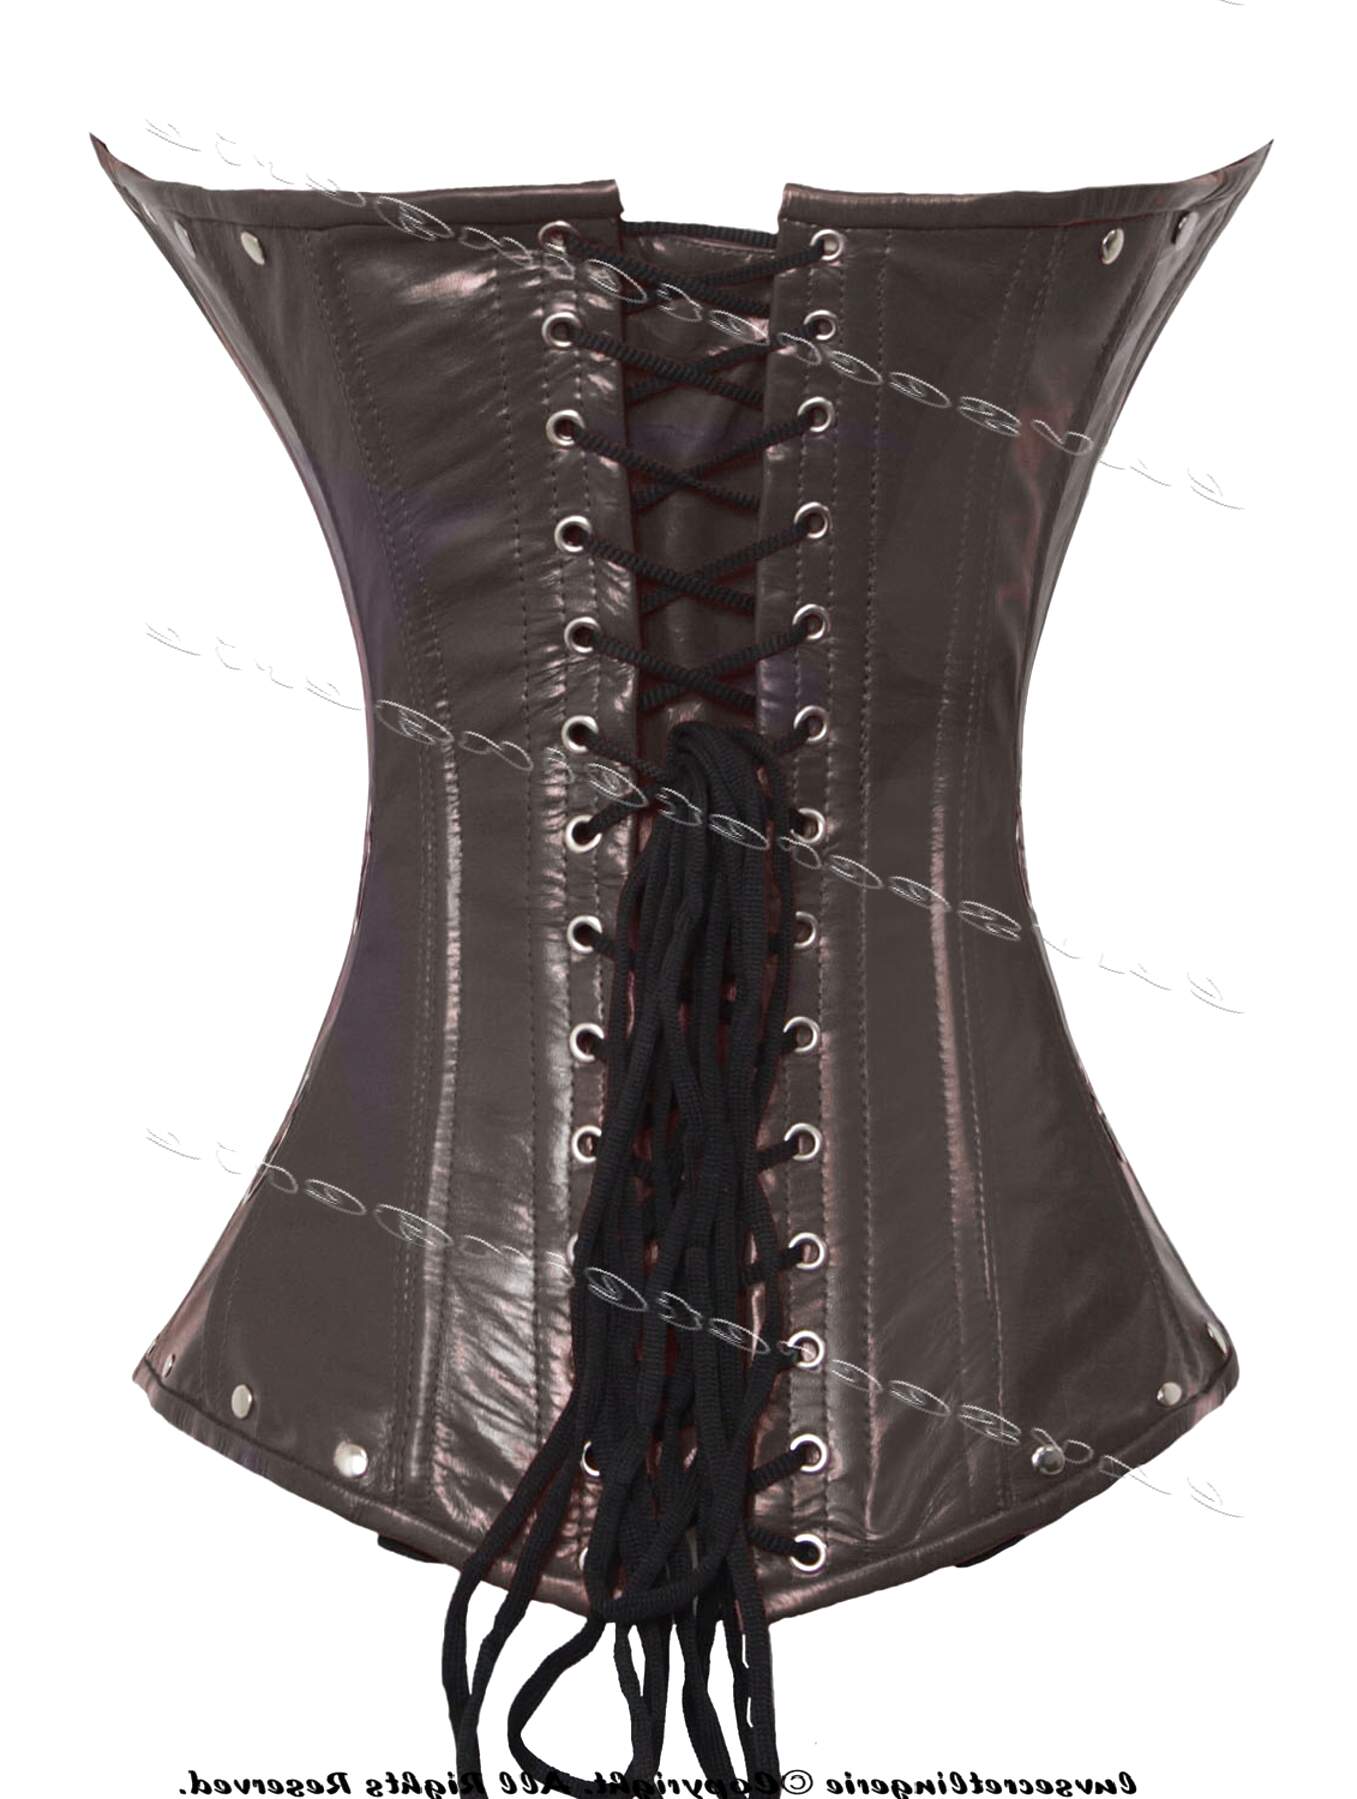 Real Leather Corset for sale in UK | 63 used Real Leather Corsets